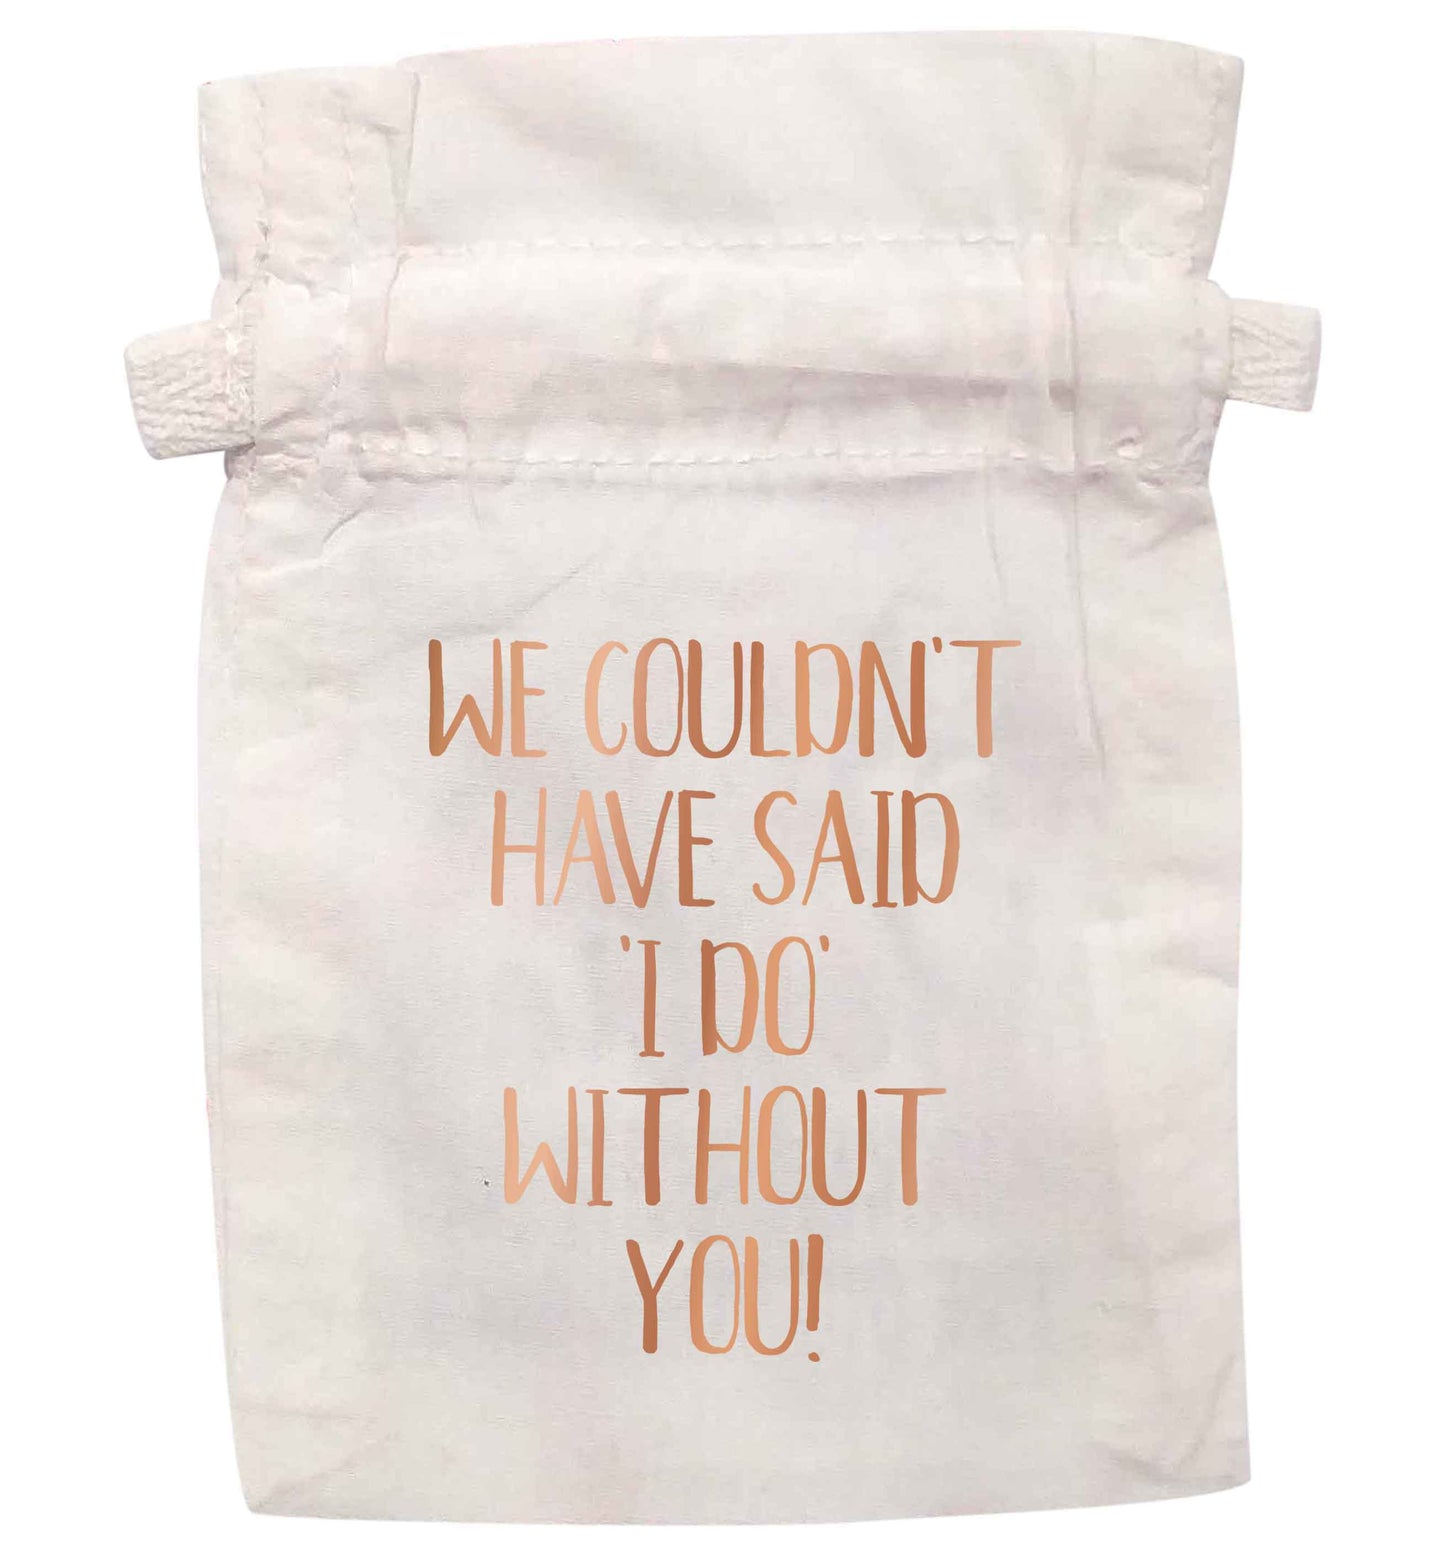 We couldn't have said I do without you - rose gold | Pouch / Drawstring bag